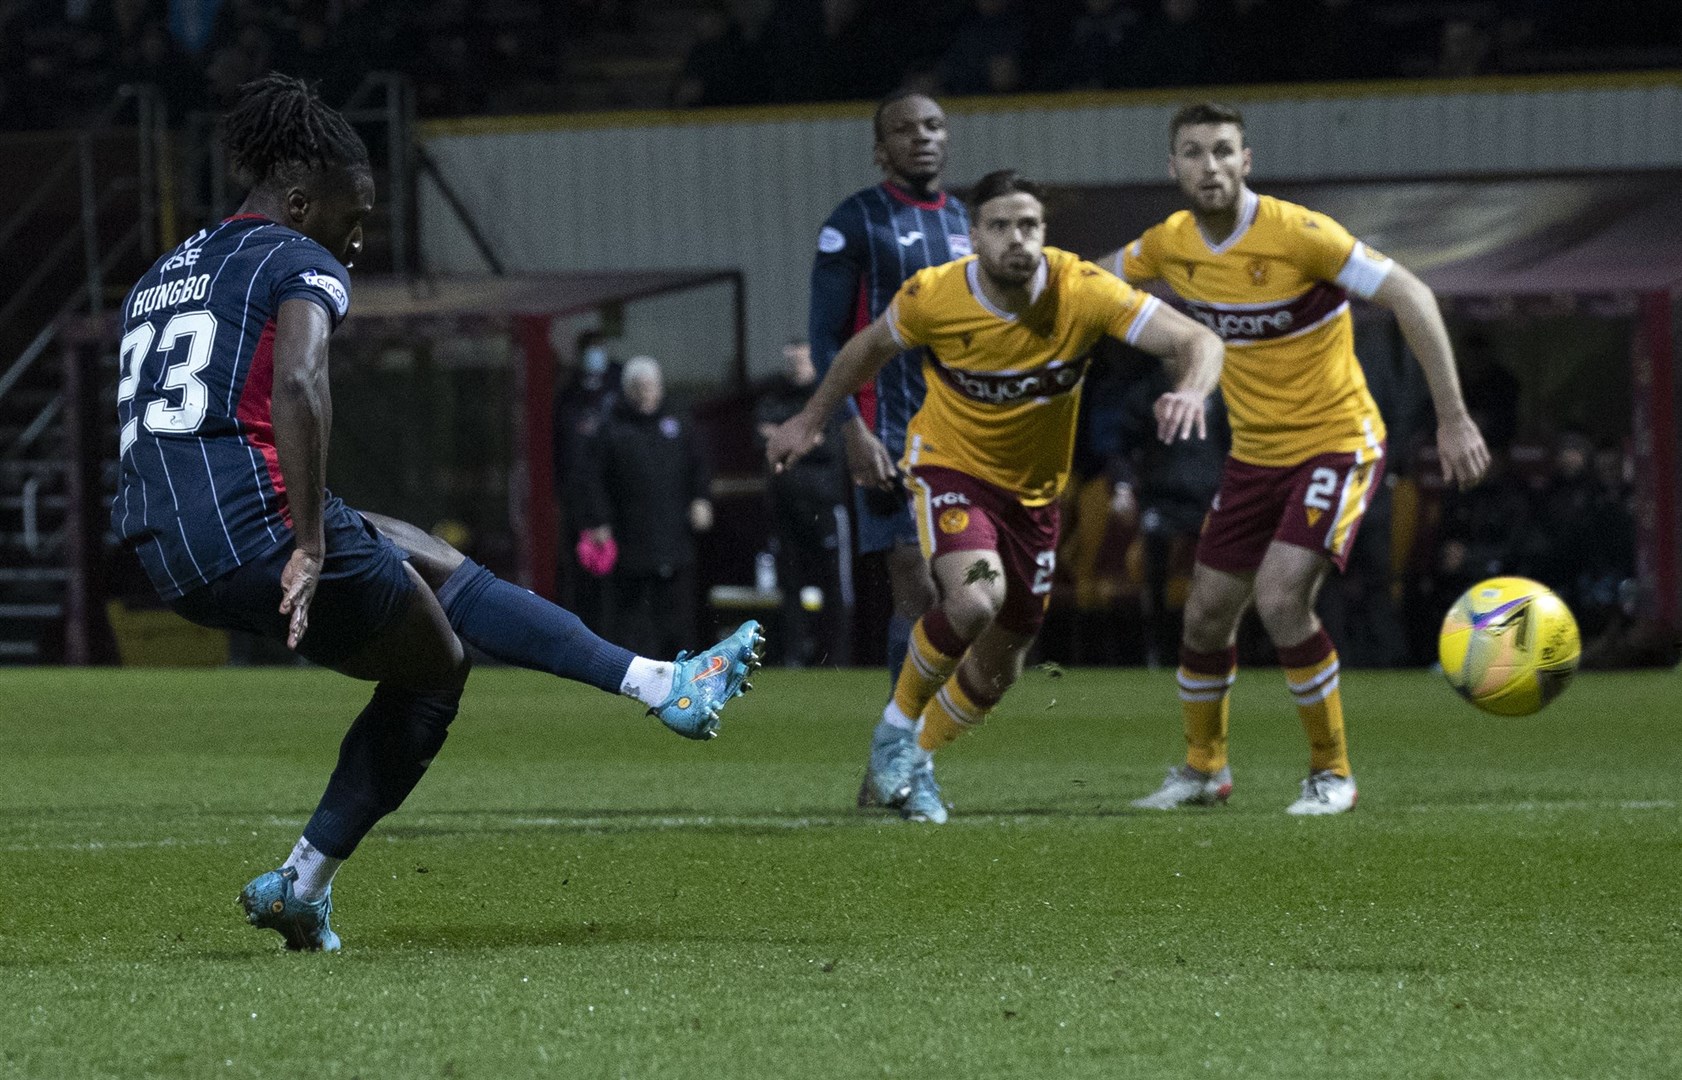 Joseph Hungbo scored the penalty which gave Ross County all three points at Motherwell.